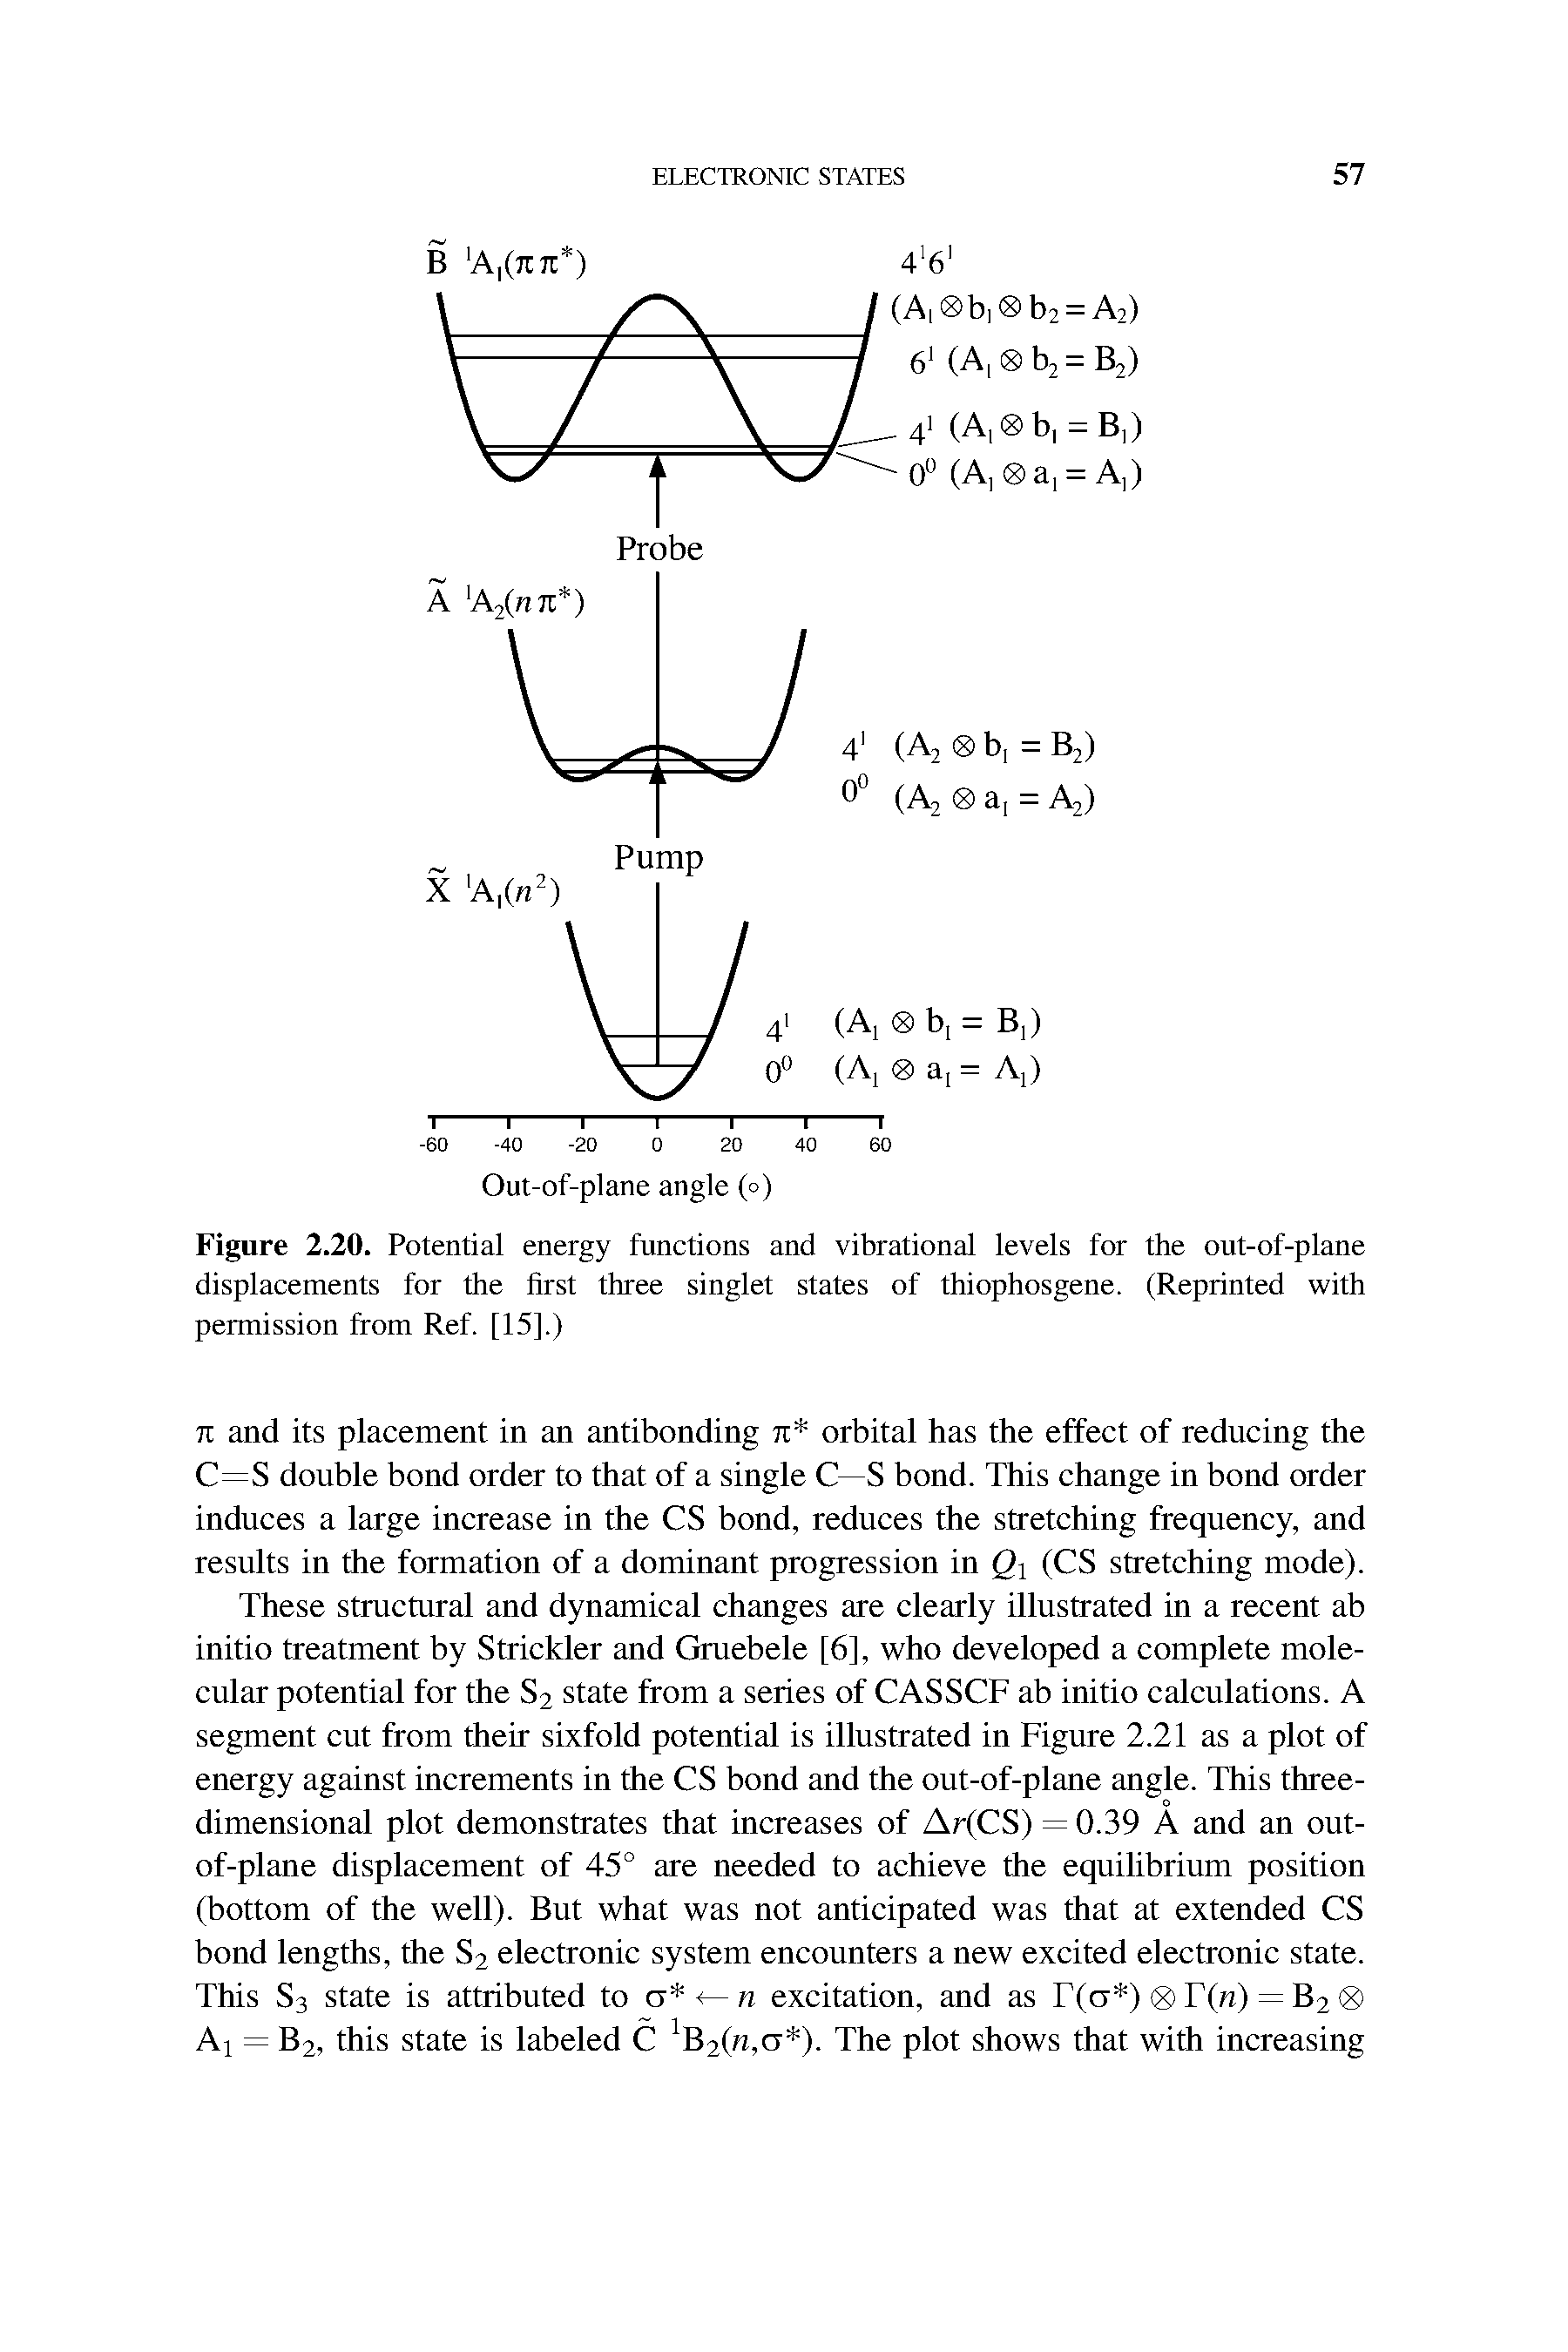 Figure 2.20. Potential energy functions and vibrational levels for the out-of-plane displacements for the first three singlet states of thiophosgene. (Reprinted with permission from Ref. [15].)...